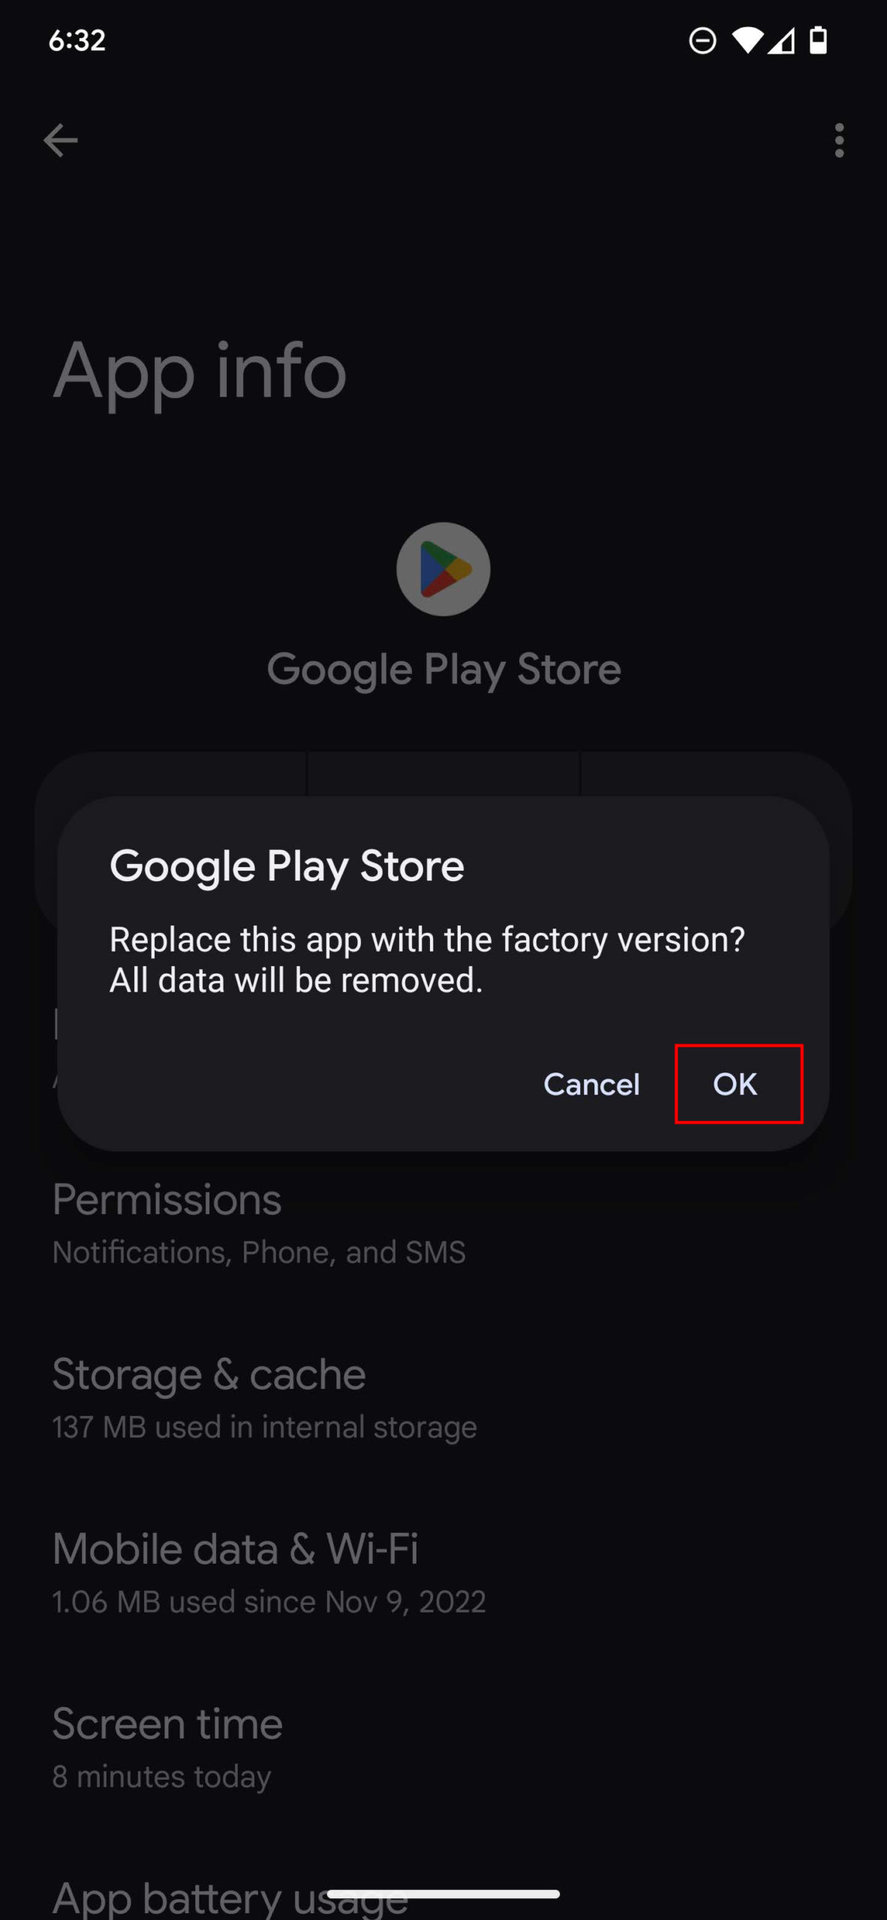 Google Play Store 31.9.20 APK now available - Fixes issues with checking  for Google Play System Updates : r/Android